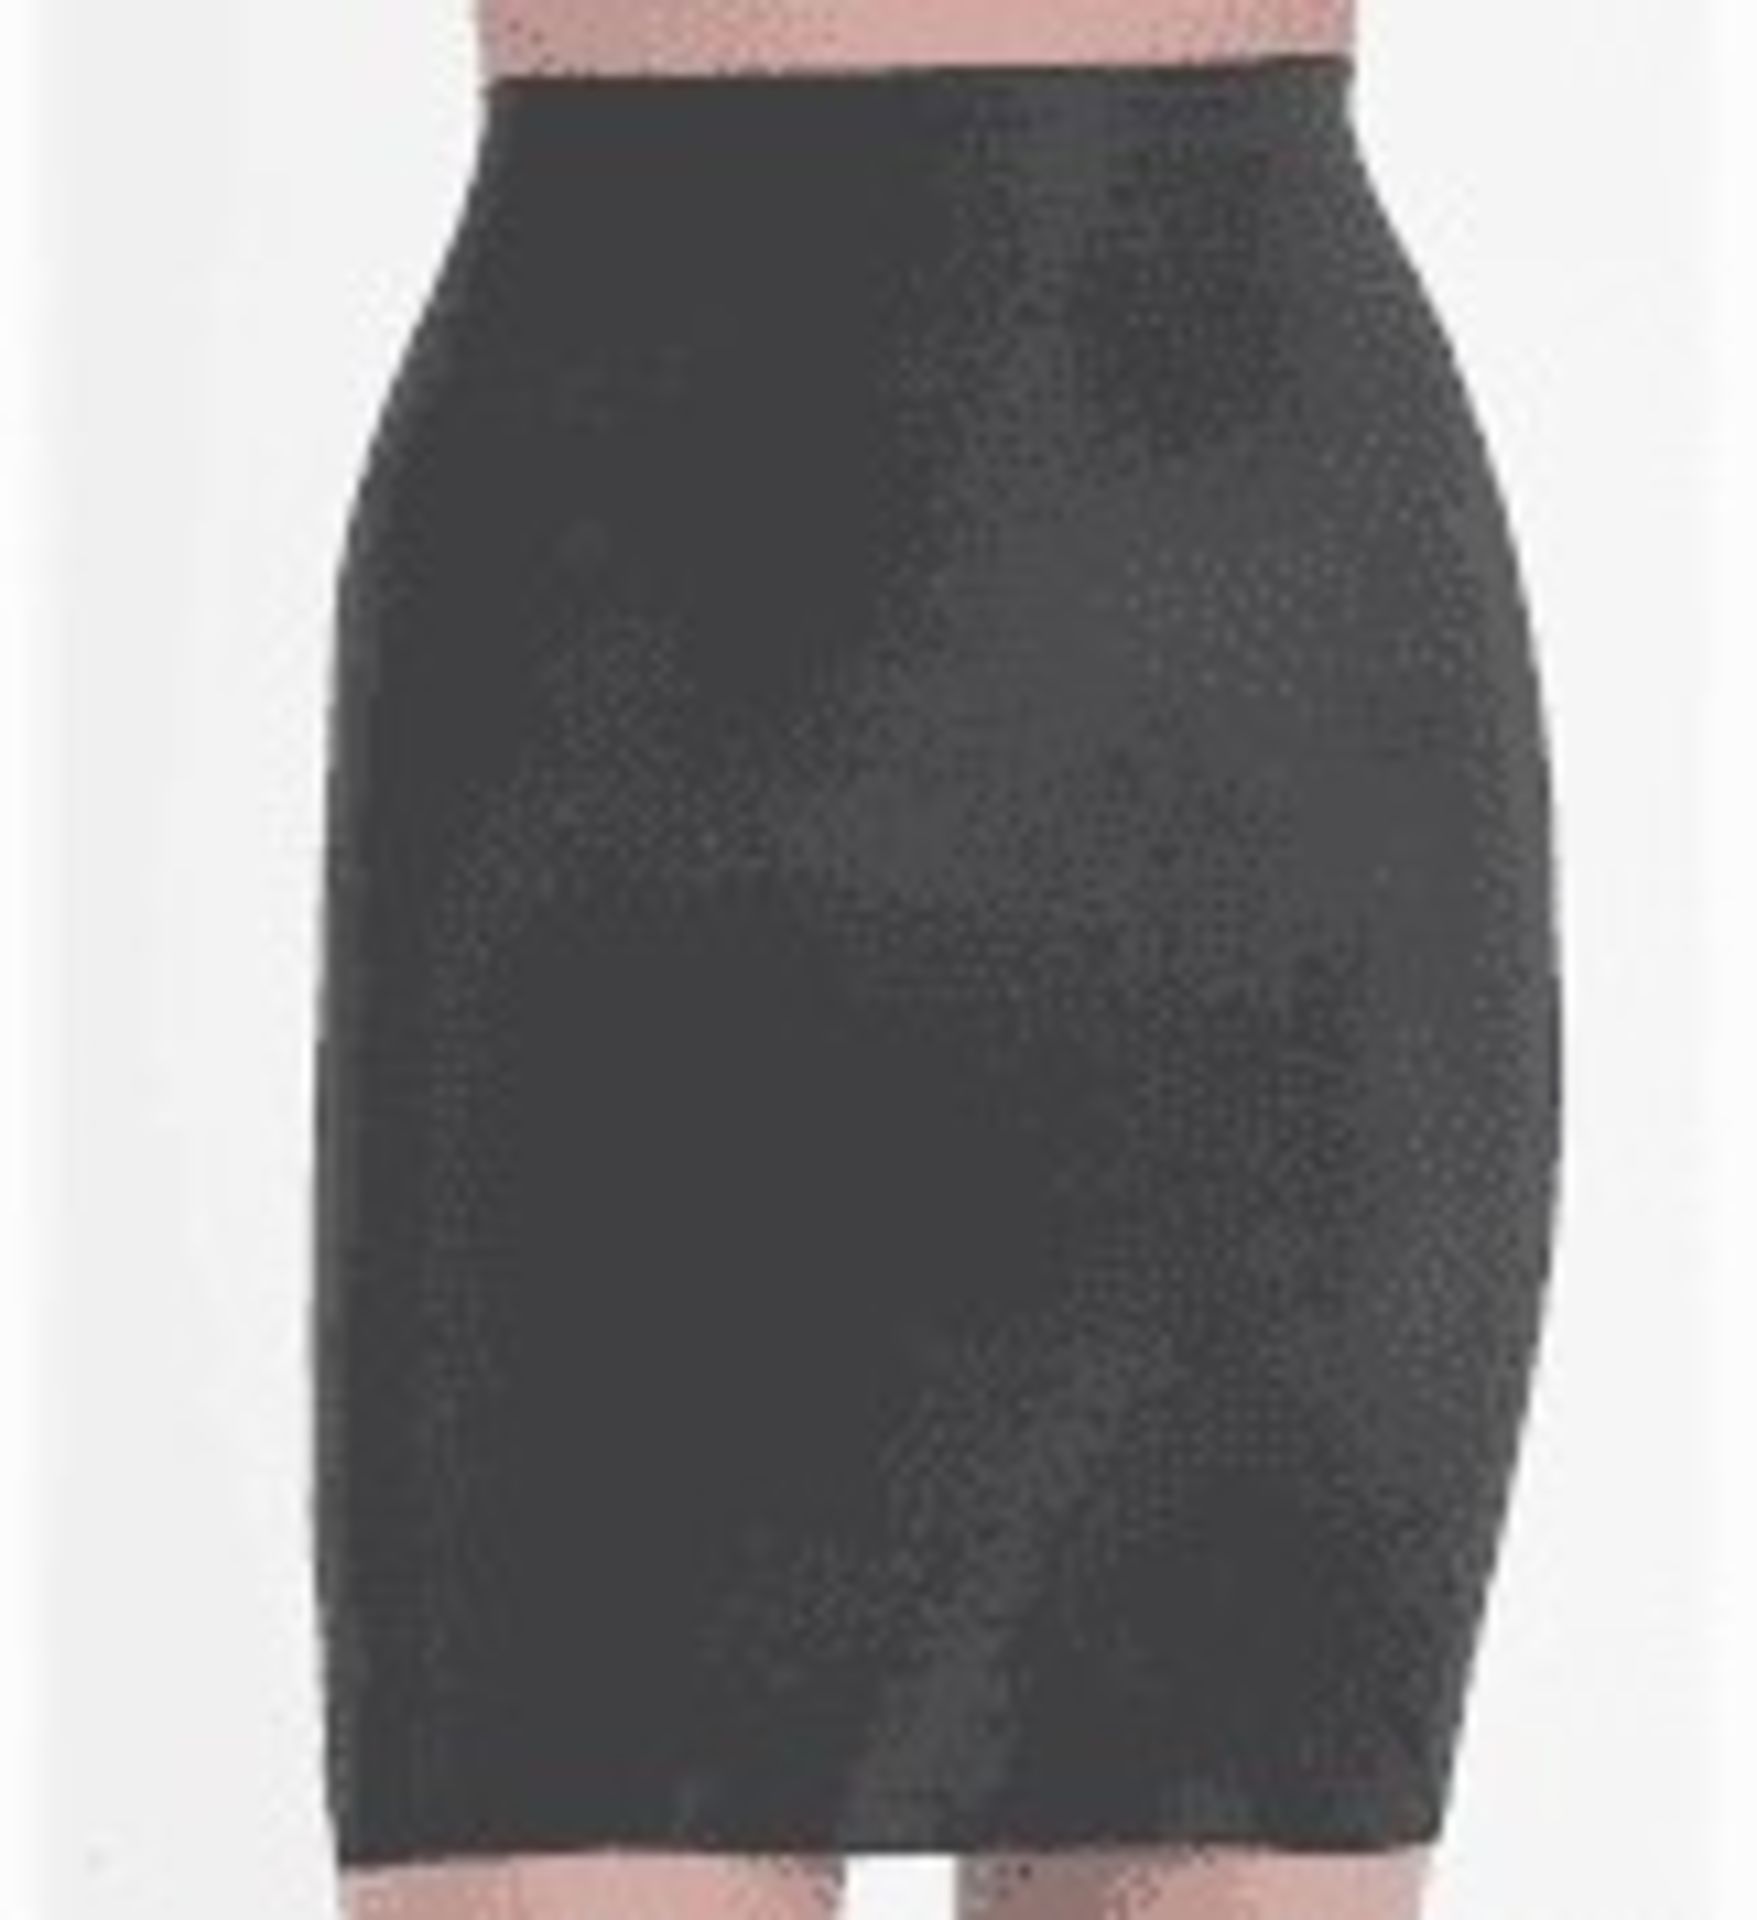 1 LOT TO CONTAIN 5 SPANX SKIRTS IN BOLD BLACK / SIZE 10 / STYLE 1899 / RRP £440.00 (PUBLIC VIEWING